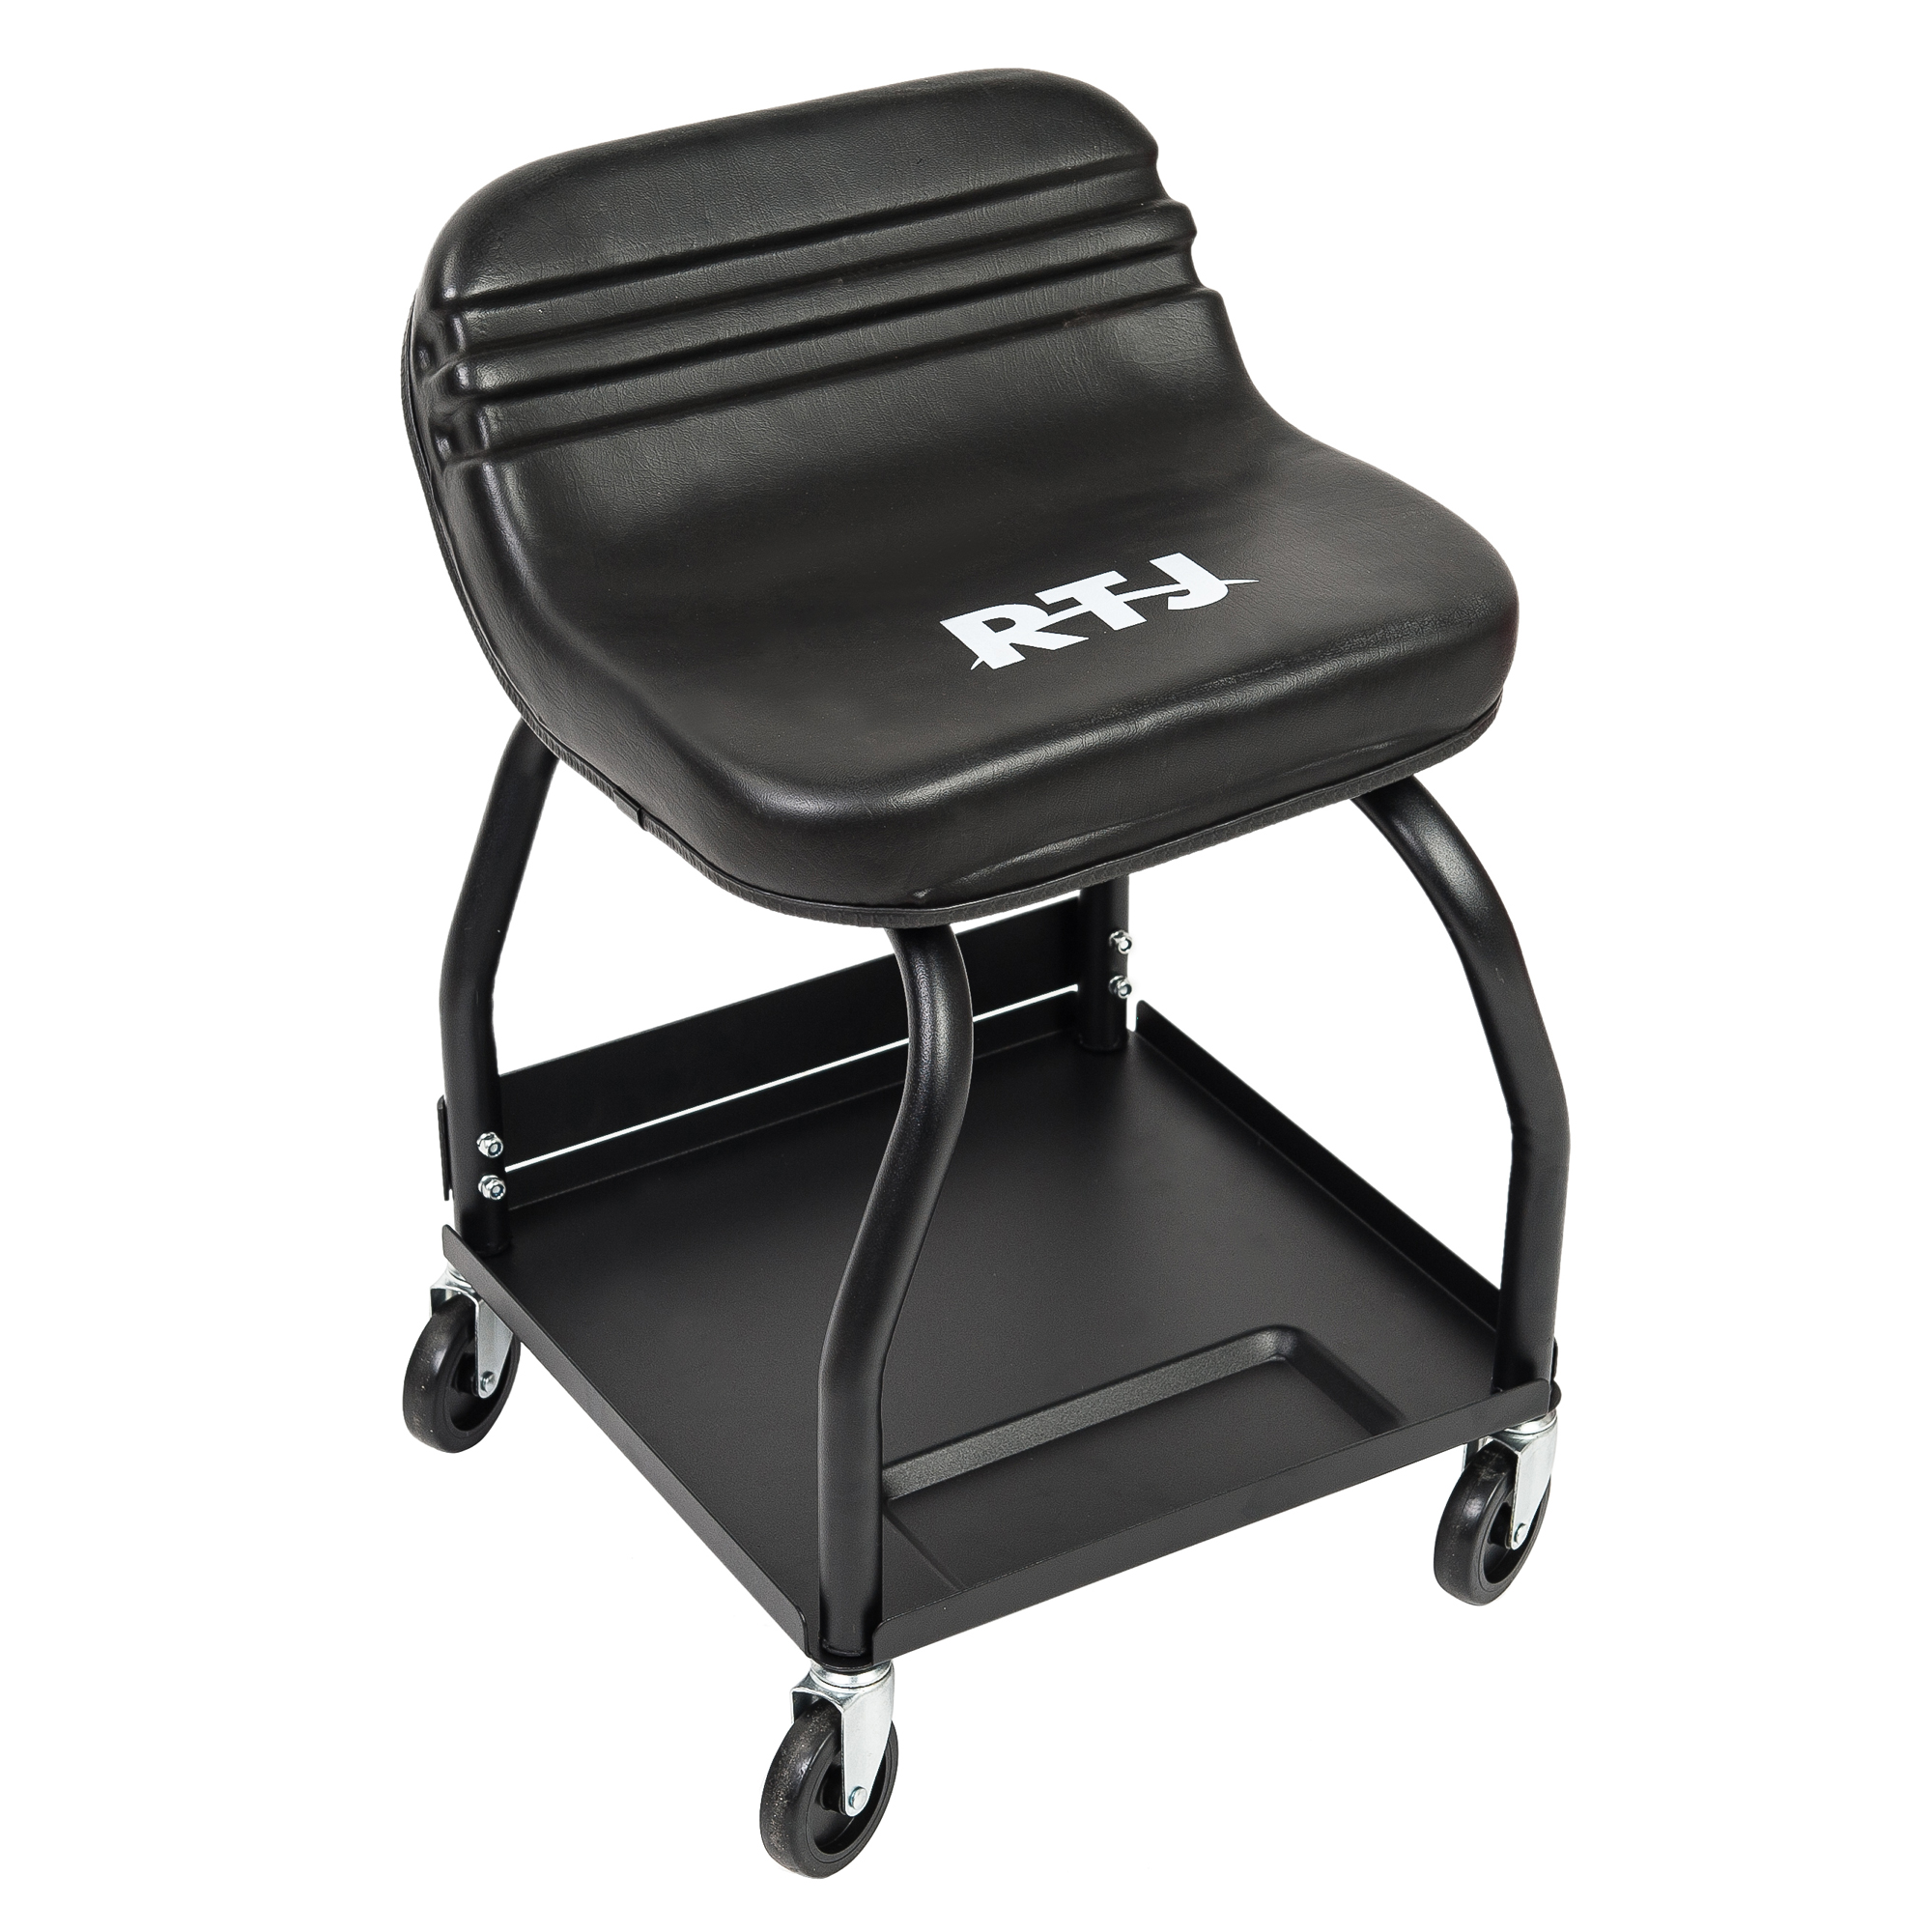 Product Introduction  This pneumatic mechanic roller seat offers a convenient chocie when you need to move around while working. With 300 lbs capacity it is sturdy and stable enough to offer a safe mo